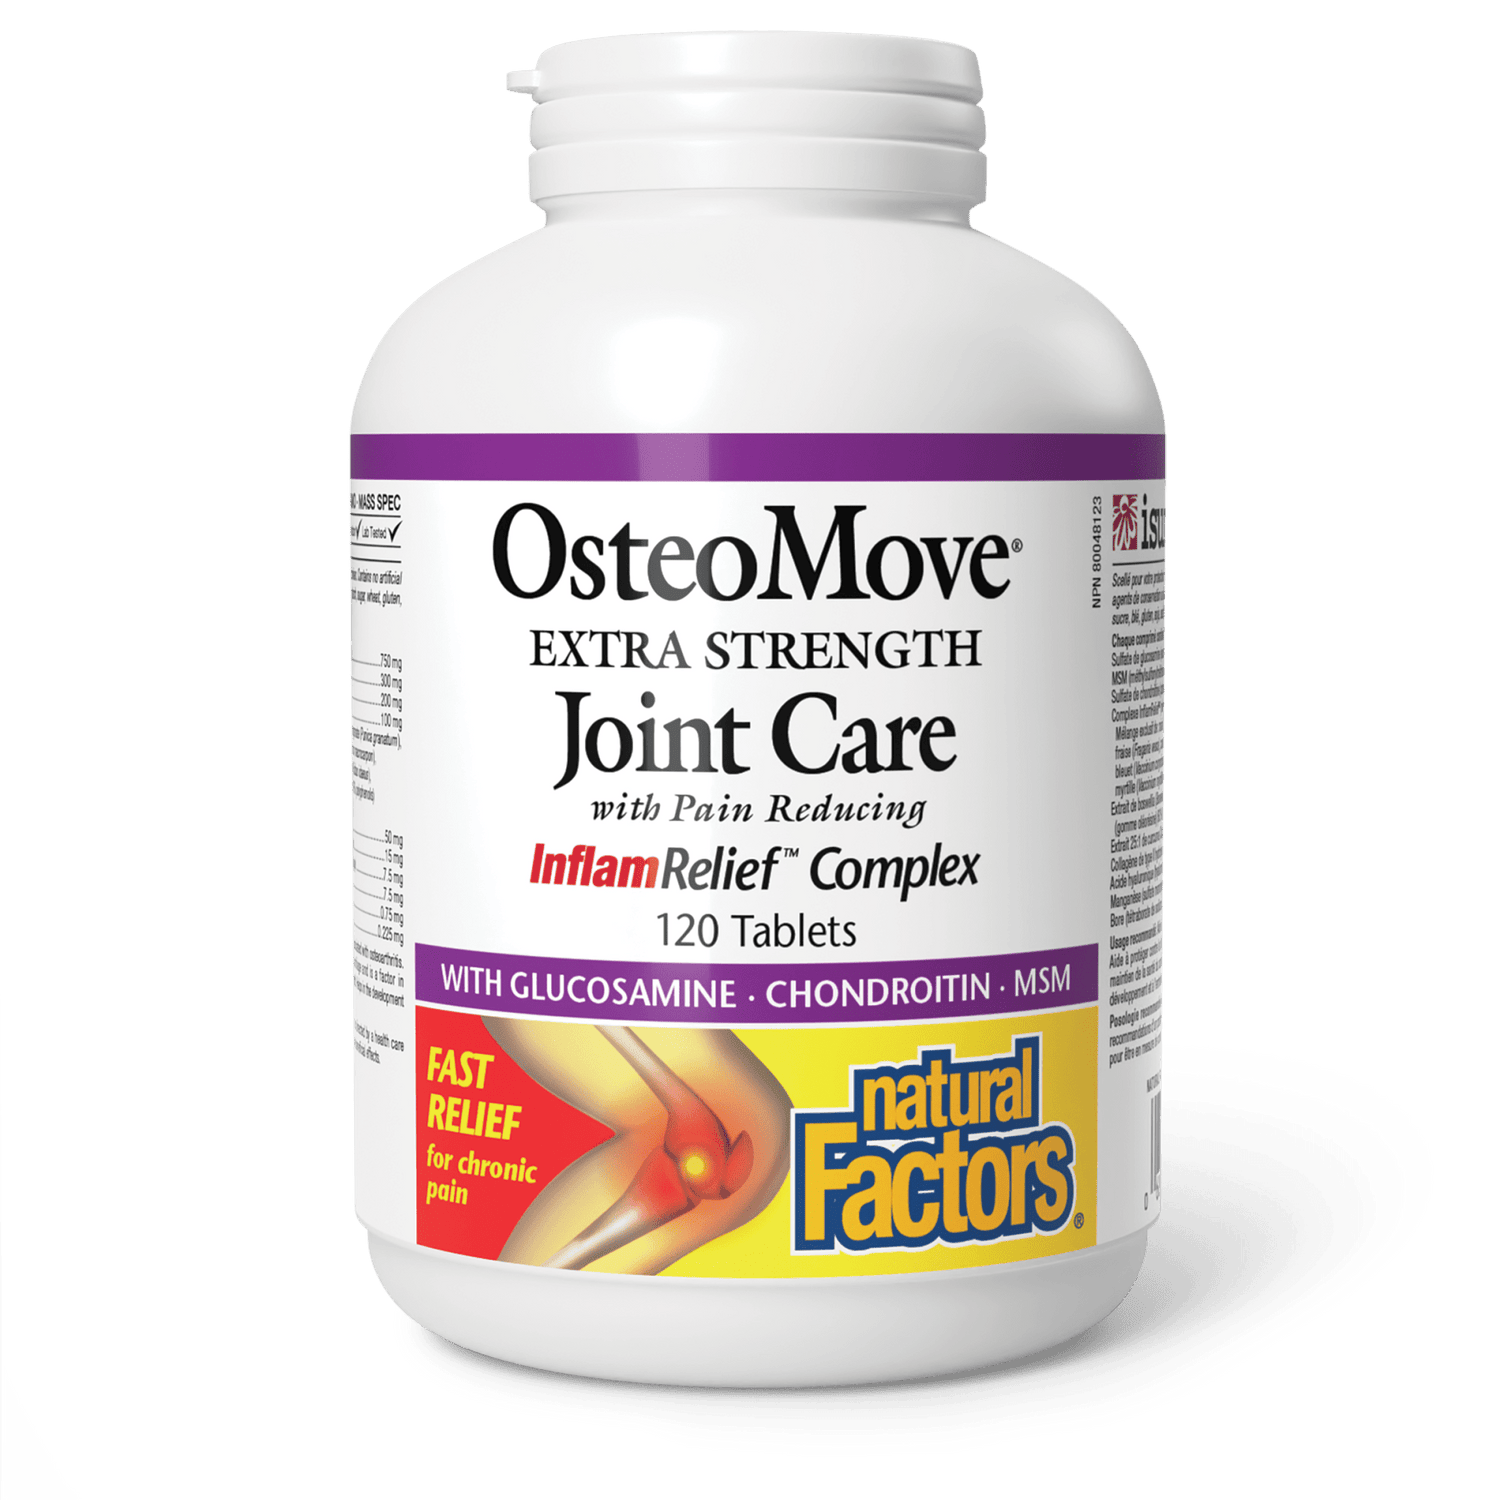 OsteoMove Joint Care Extra Strength, Natural Factors|v|image|2684